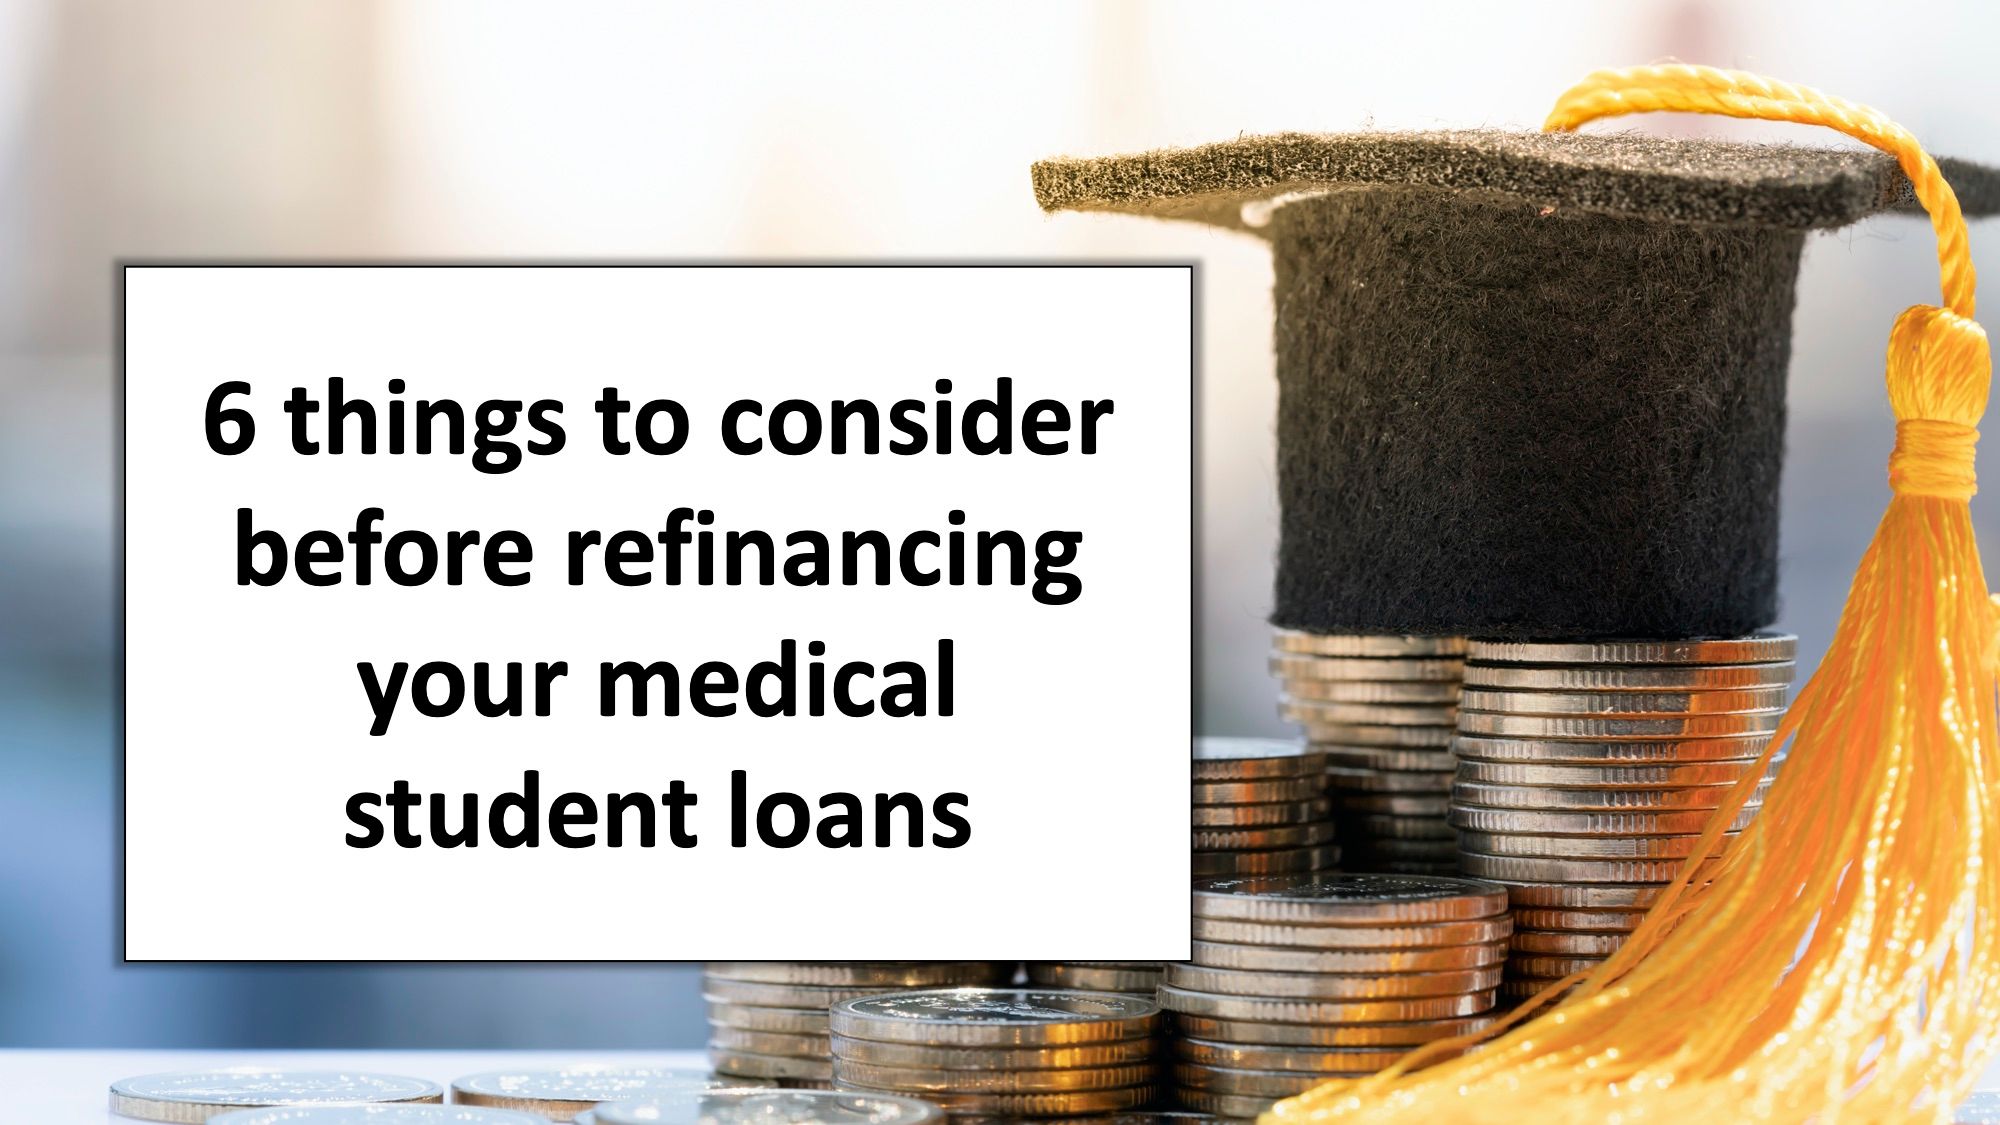 6 things to consider before refinancing your medical student loans